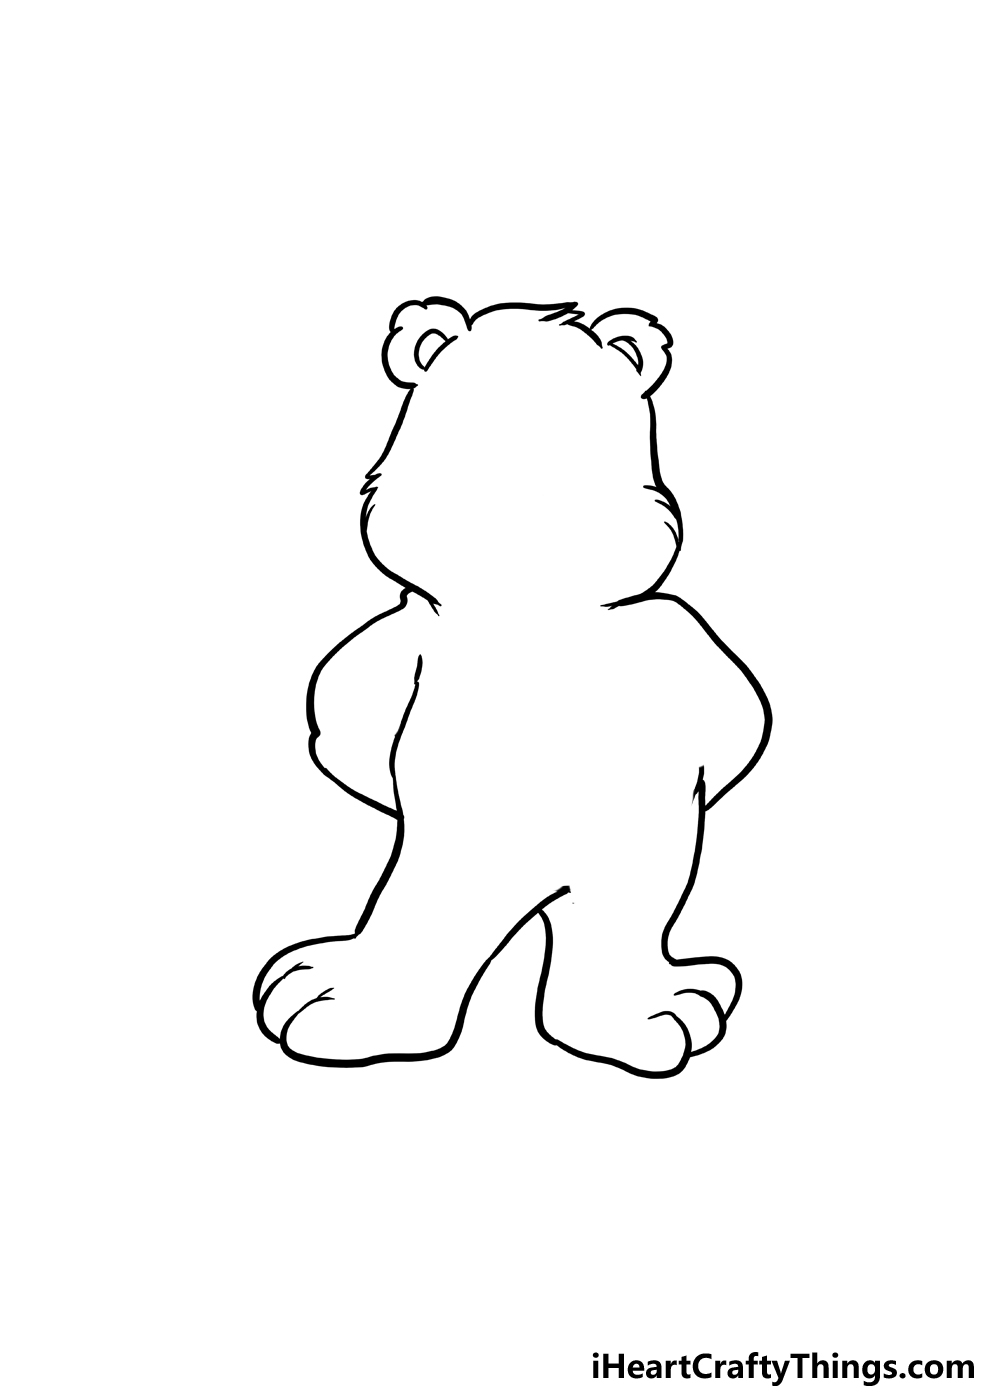 How to Draw A Care Bear step 3